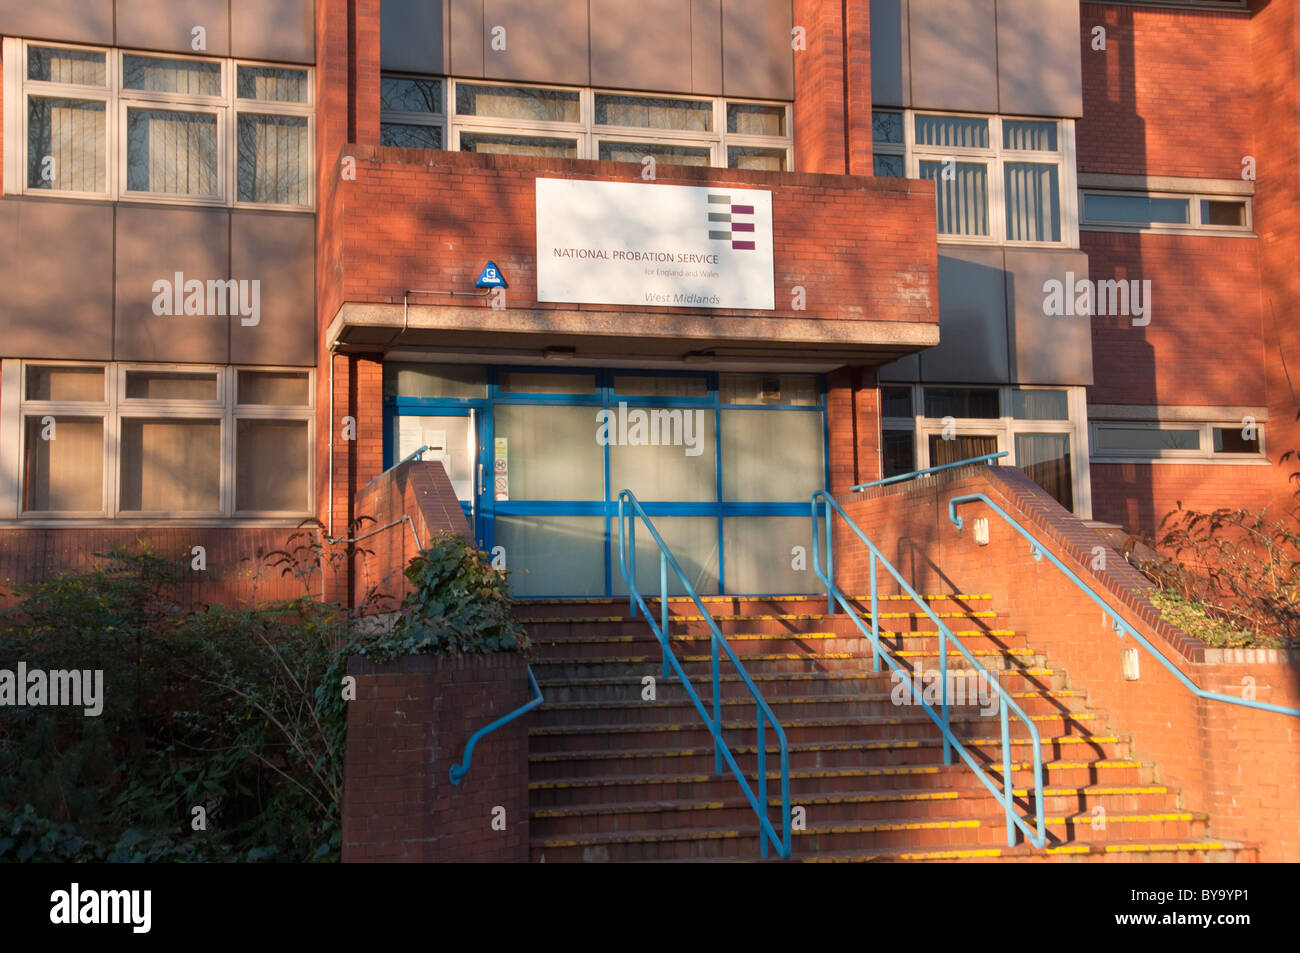 National Probation Service building in Coventry, West Midlands Stock Photo